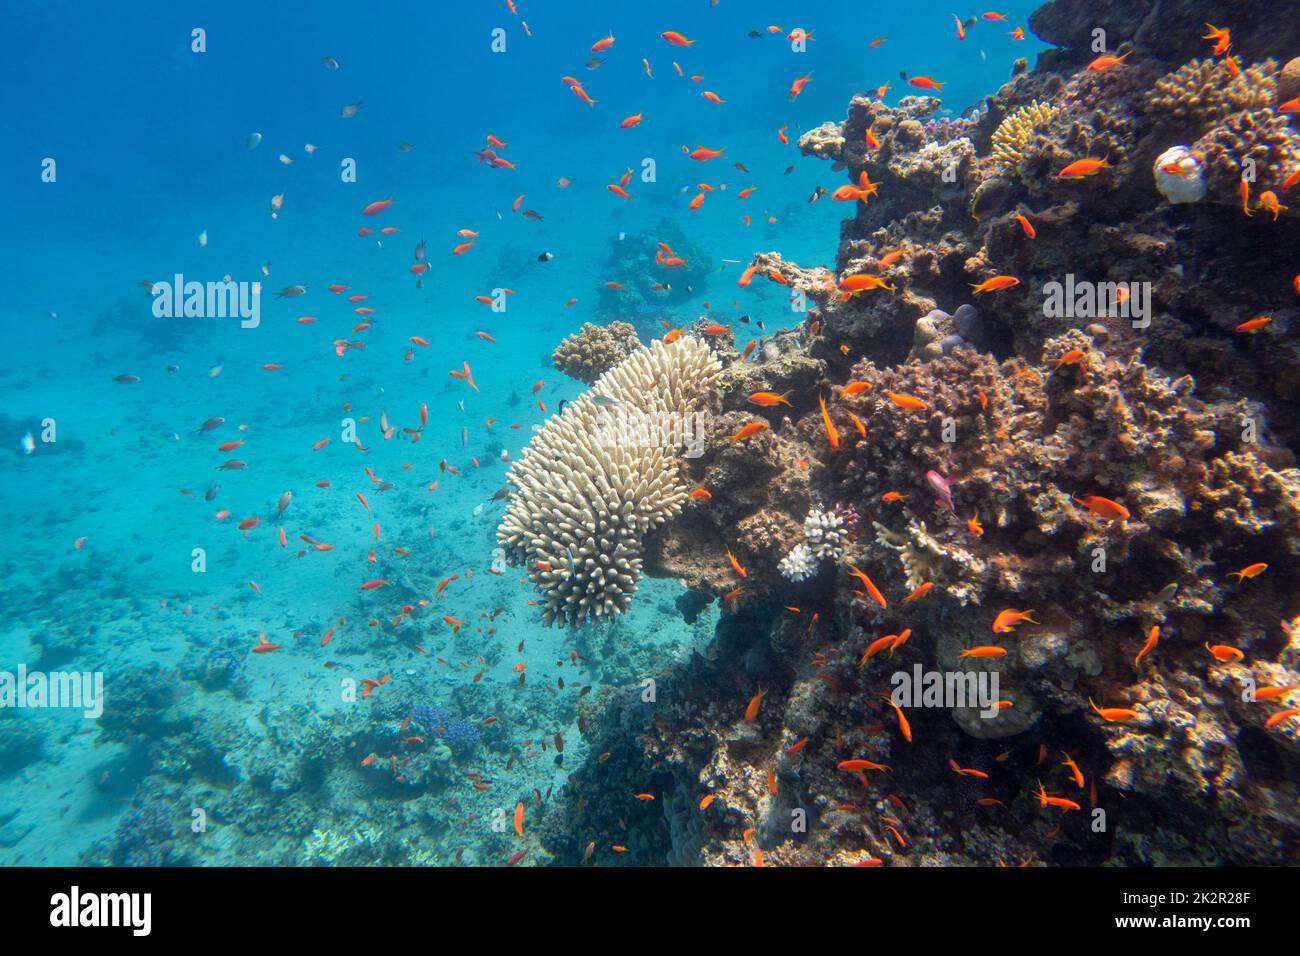 Colorful, picturesque coral reef at the sandy bottom of tropical sea, hard corals with Anthias and chromis fishes, underwater landscape Stock Photo